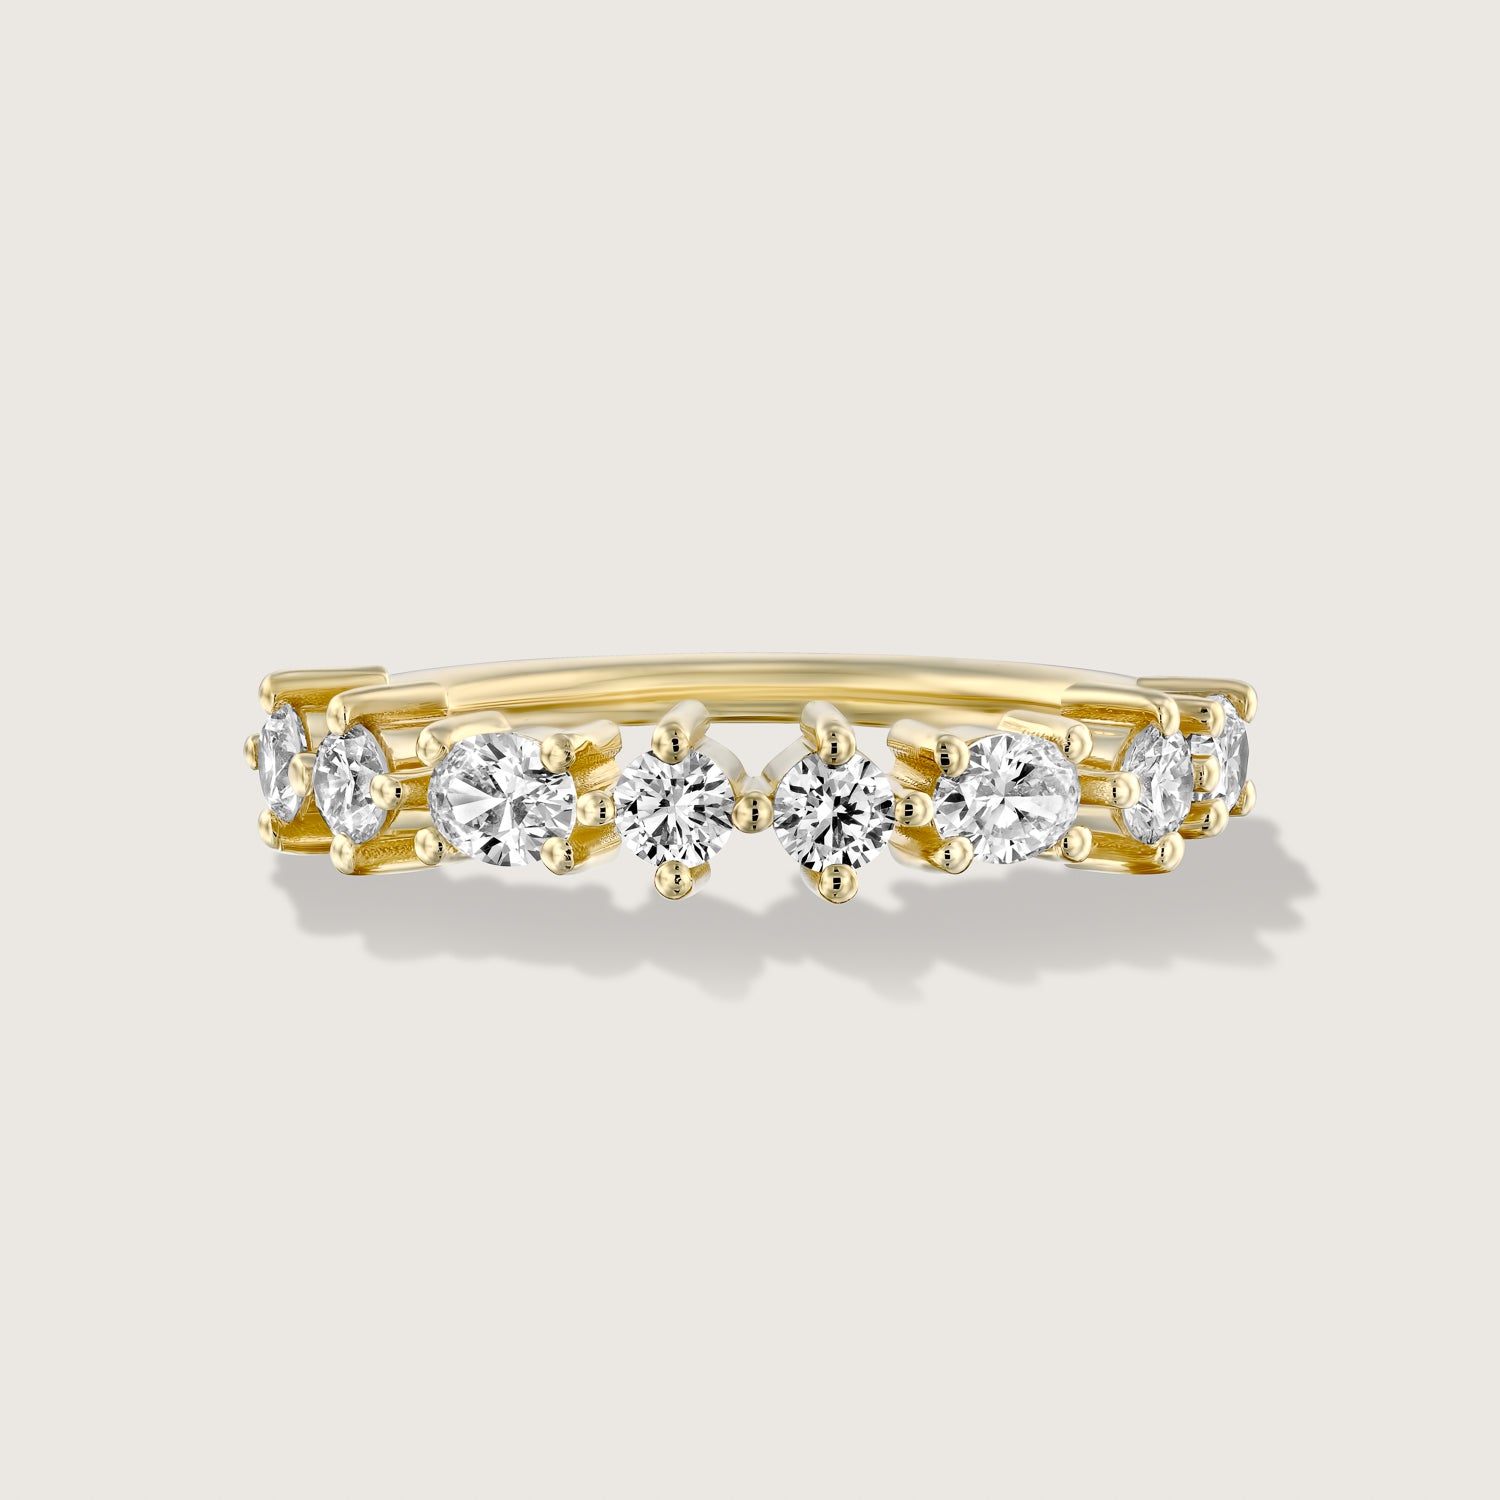 Queen E Gold Ring with White Diamonds